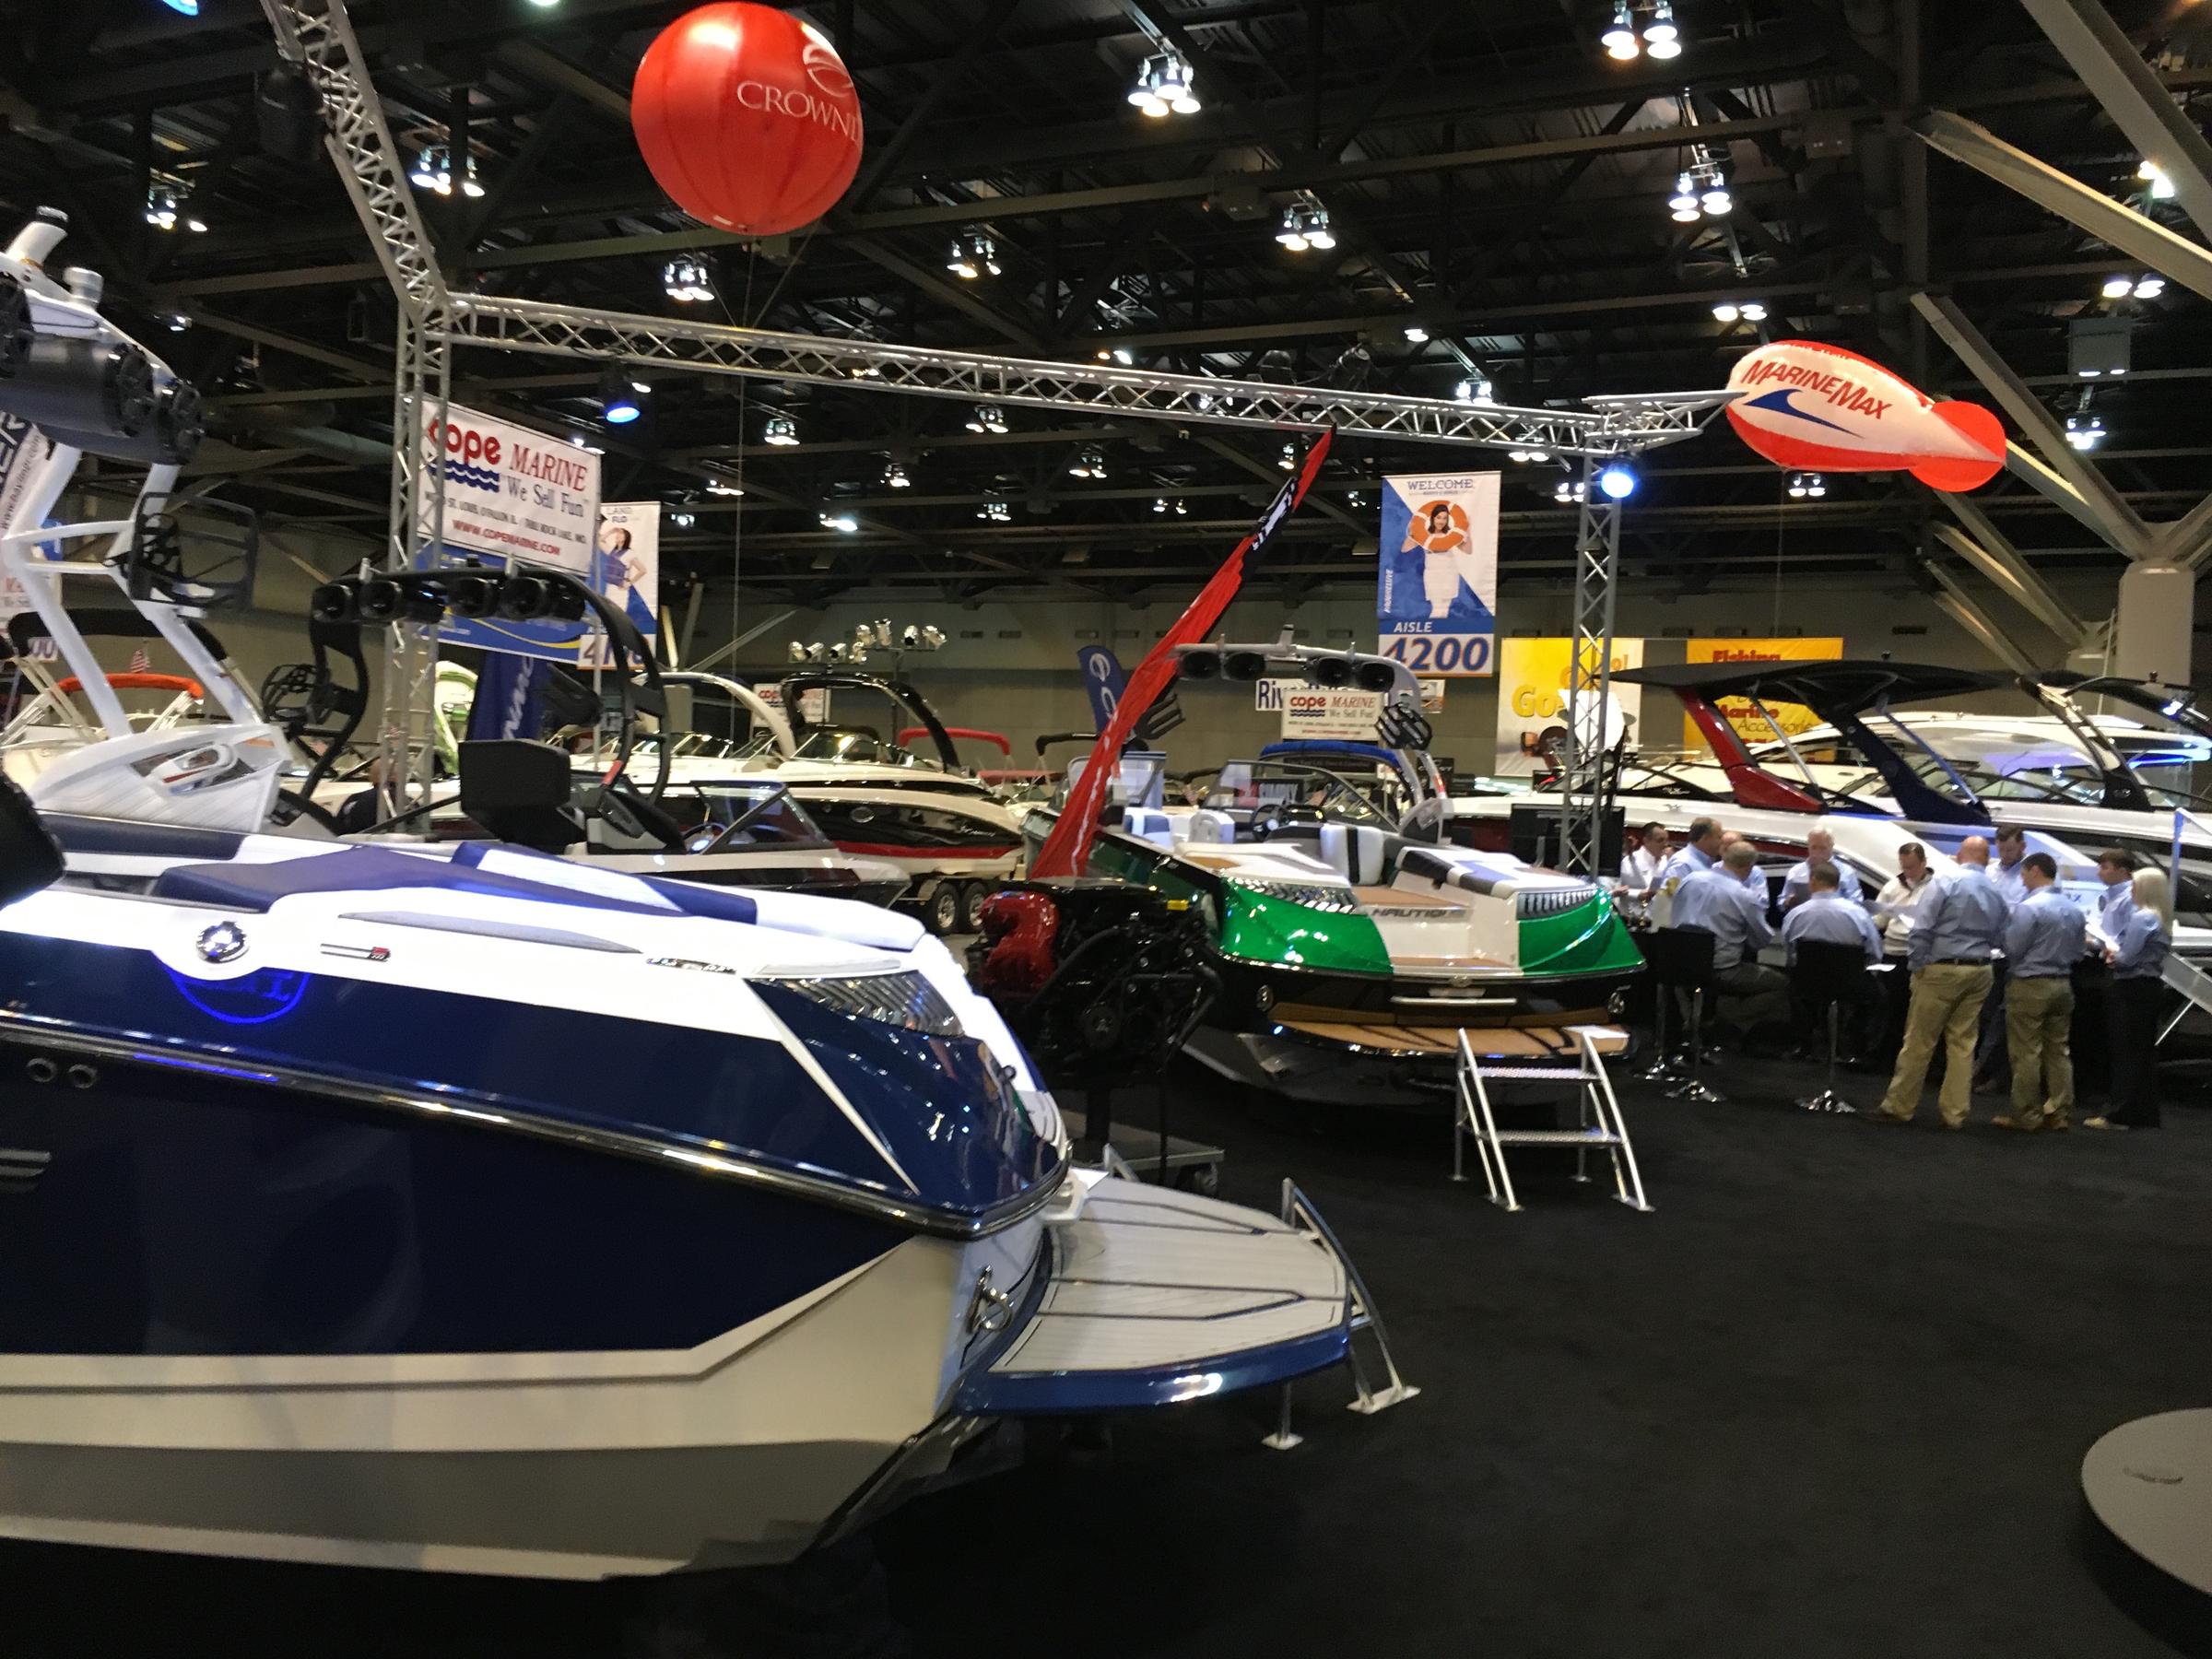 St. Louis Boat Show provides glimpse of life after the Rams St. Louis